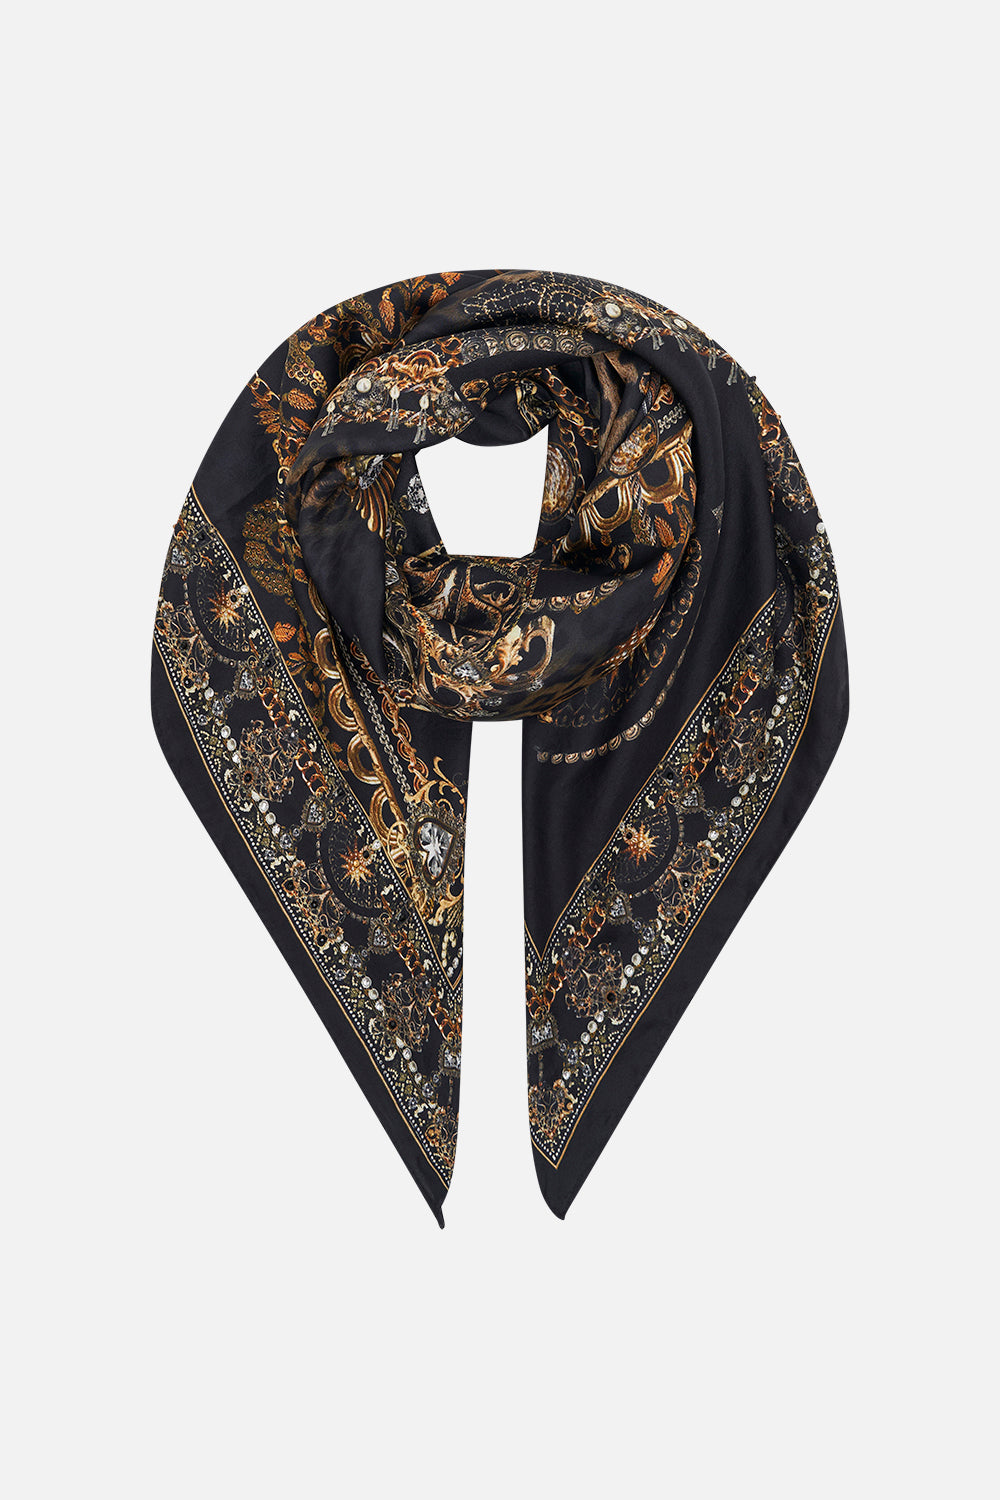 Product view of CAMILLA silk scarf in Masked At Moonlight print